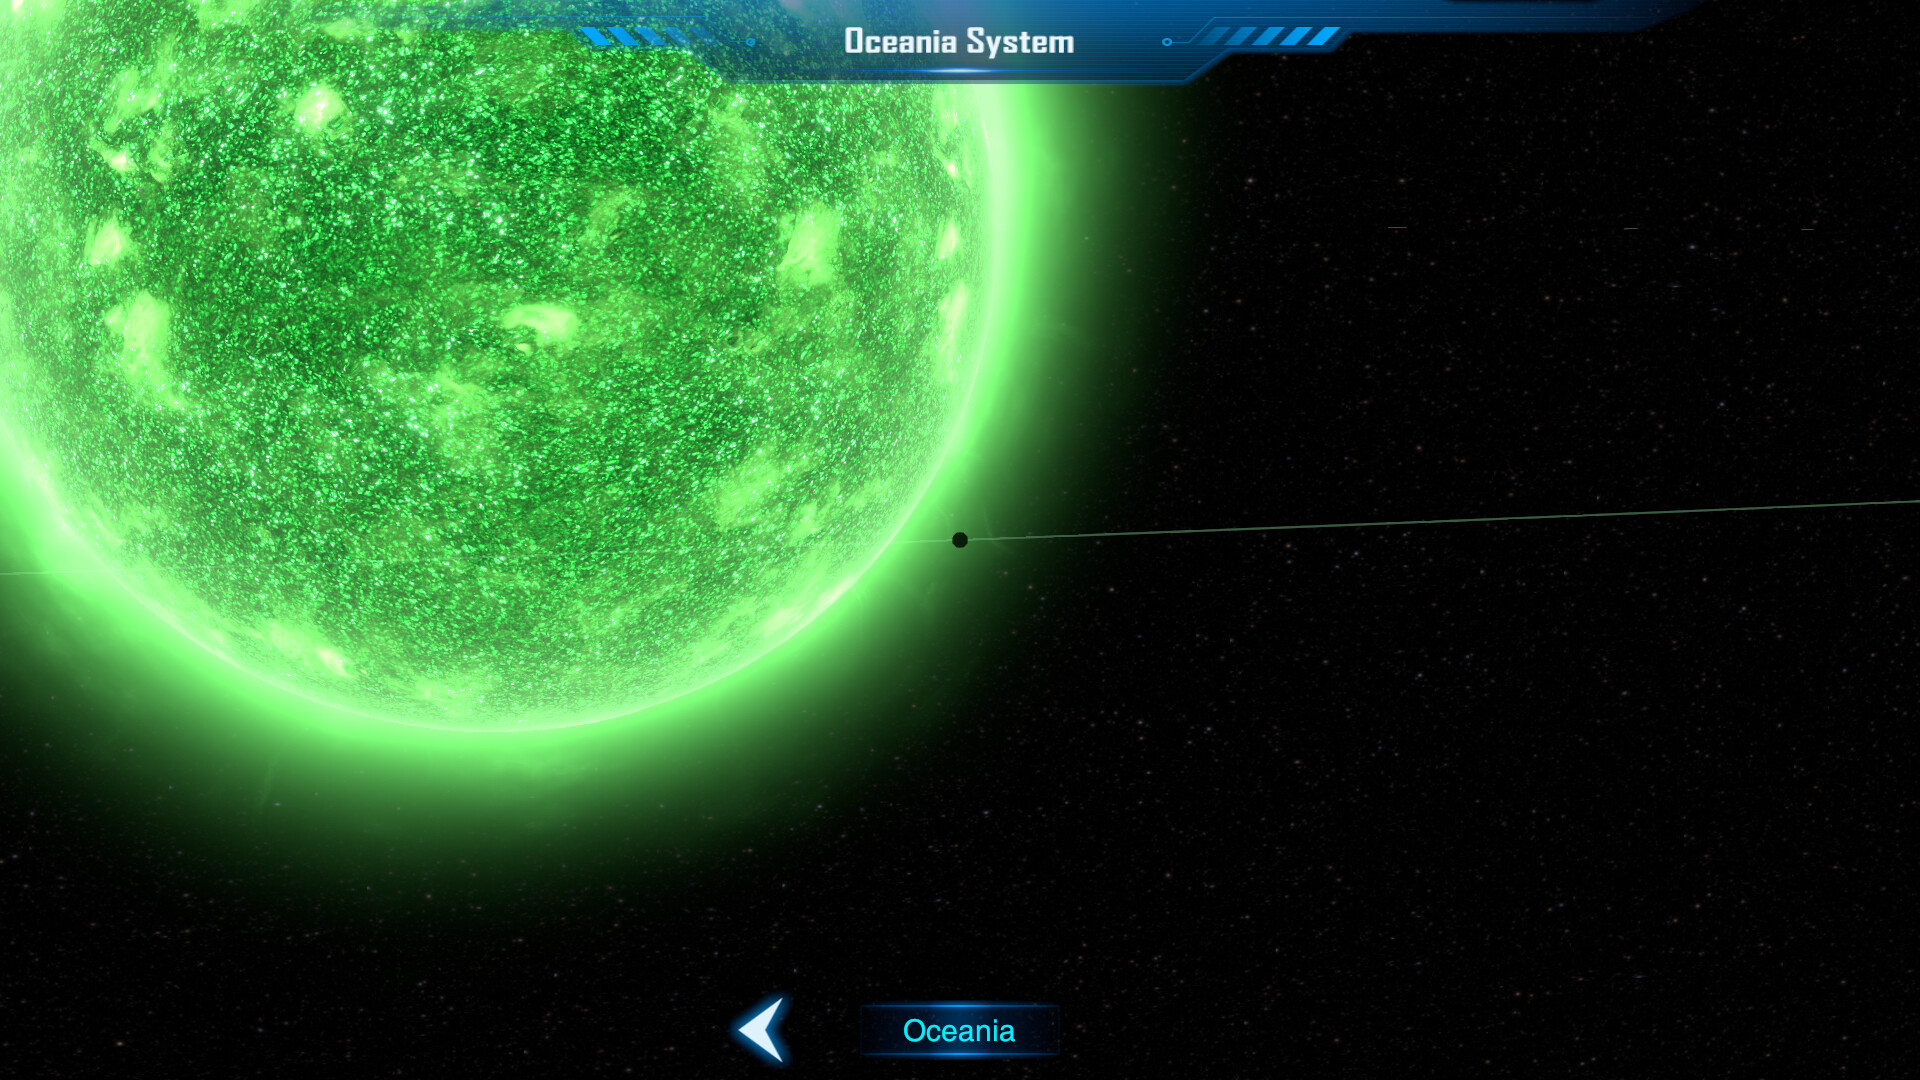 Solar Systems For Kids on Steam